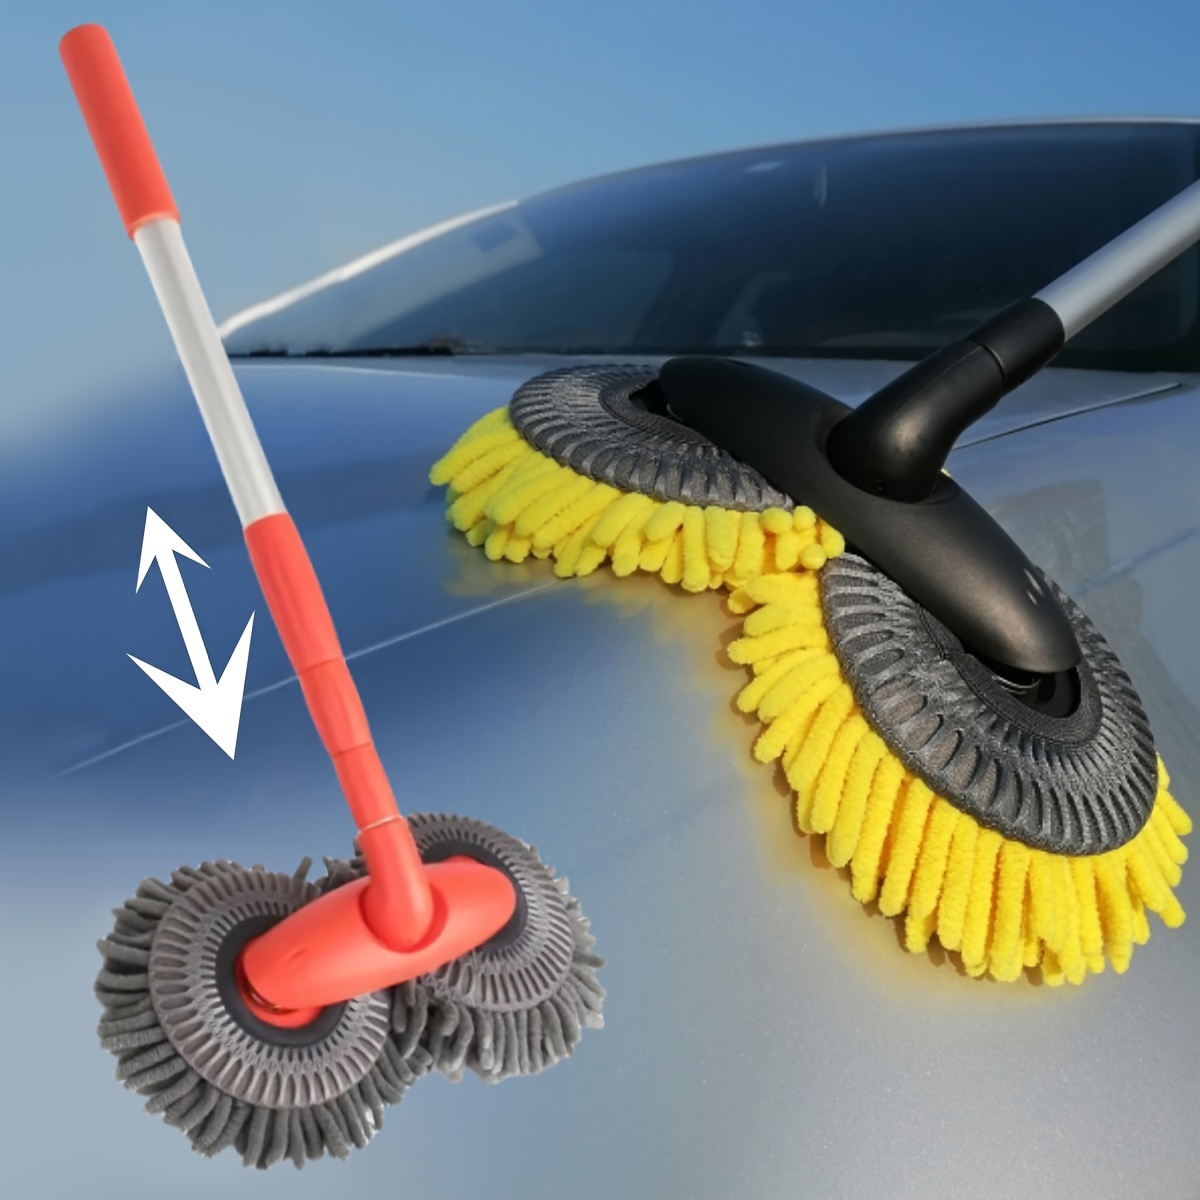 

Ultimate Car Cleaning Kit: Microfiber Brush Mop, Mitt, Sponge & More - Get A Spotless Shine Every Time!